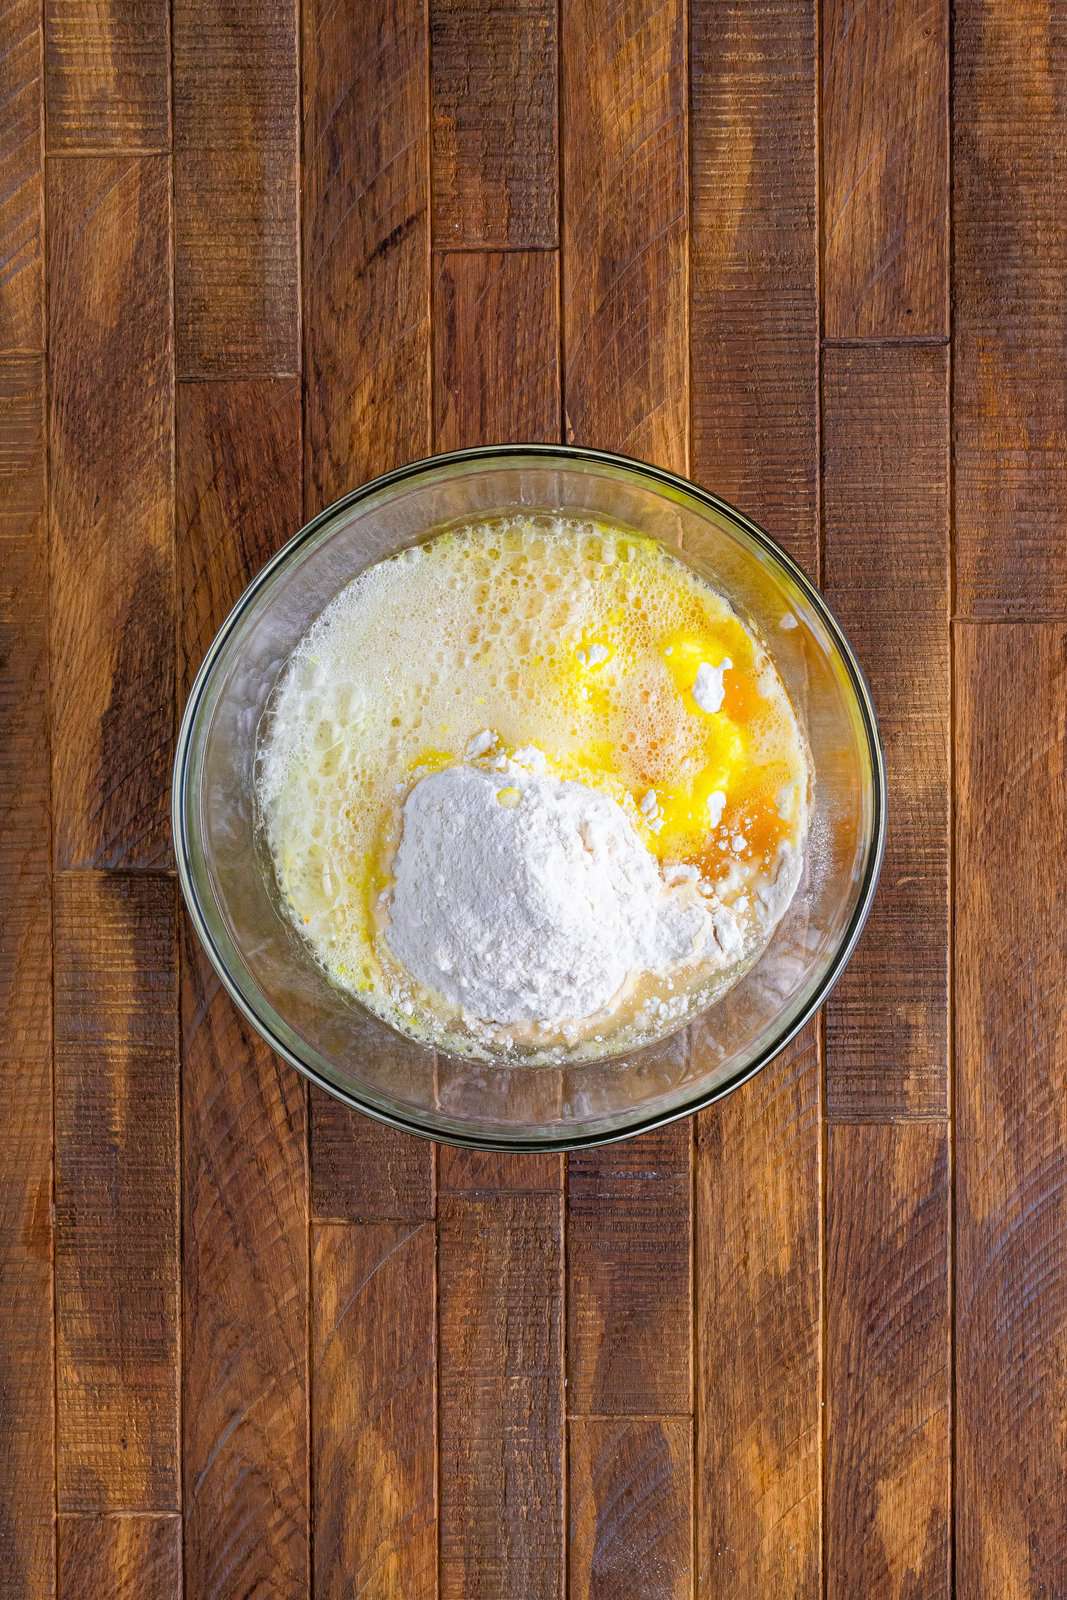 cake mix, instant lemon pudding, eggs, oil and 7up shown in a large clear bowl.